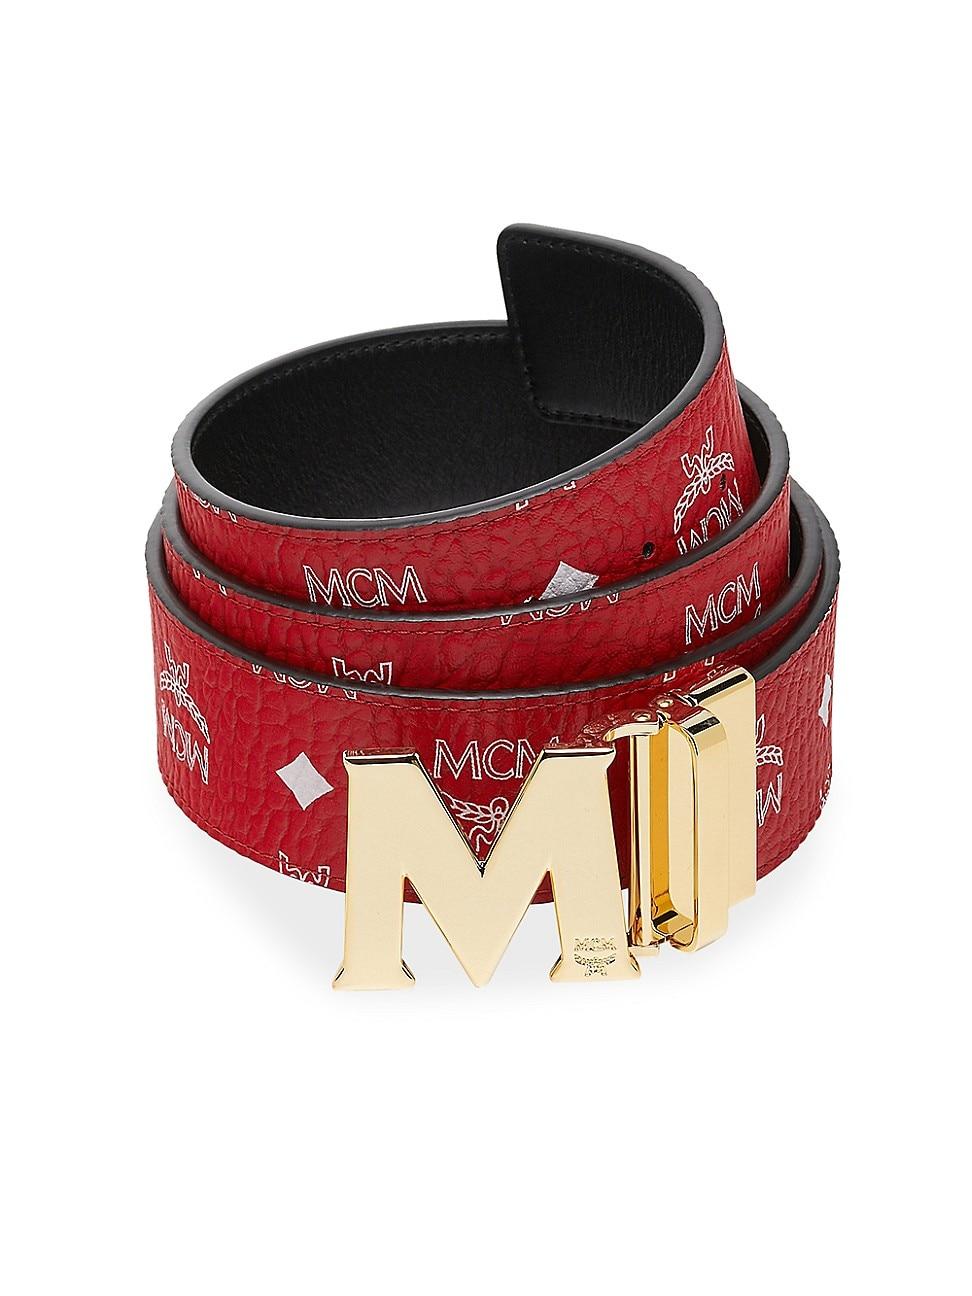 MCM Mens Claus Black M Buckle Candy Red Leather Reversible Belt